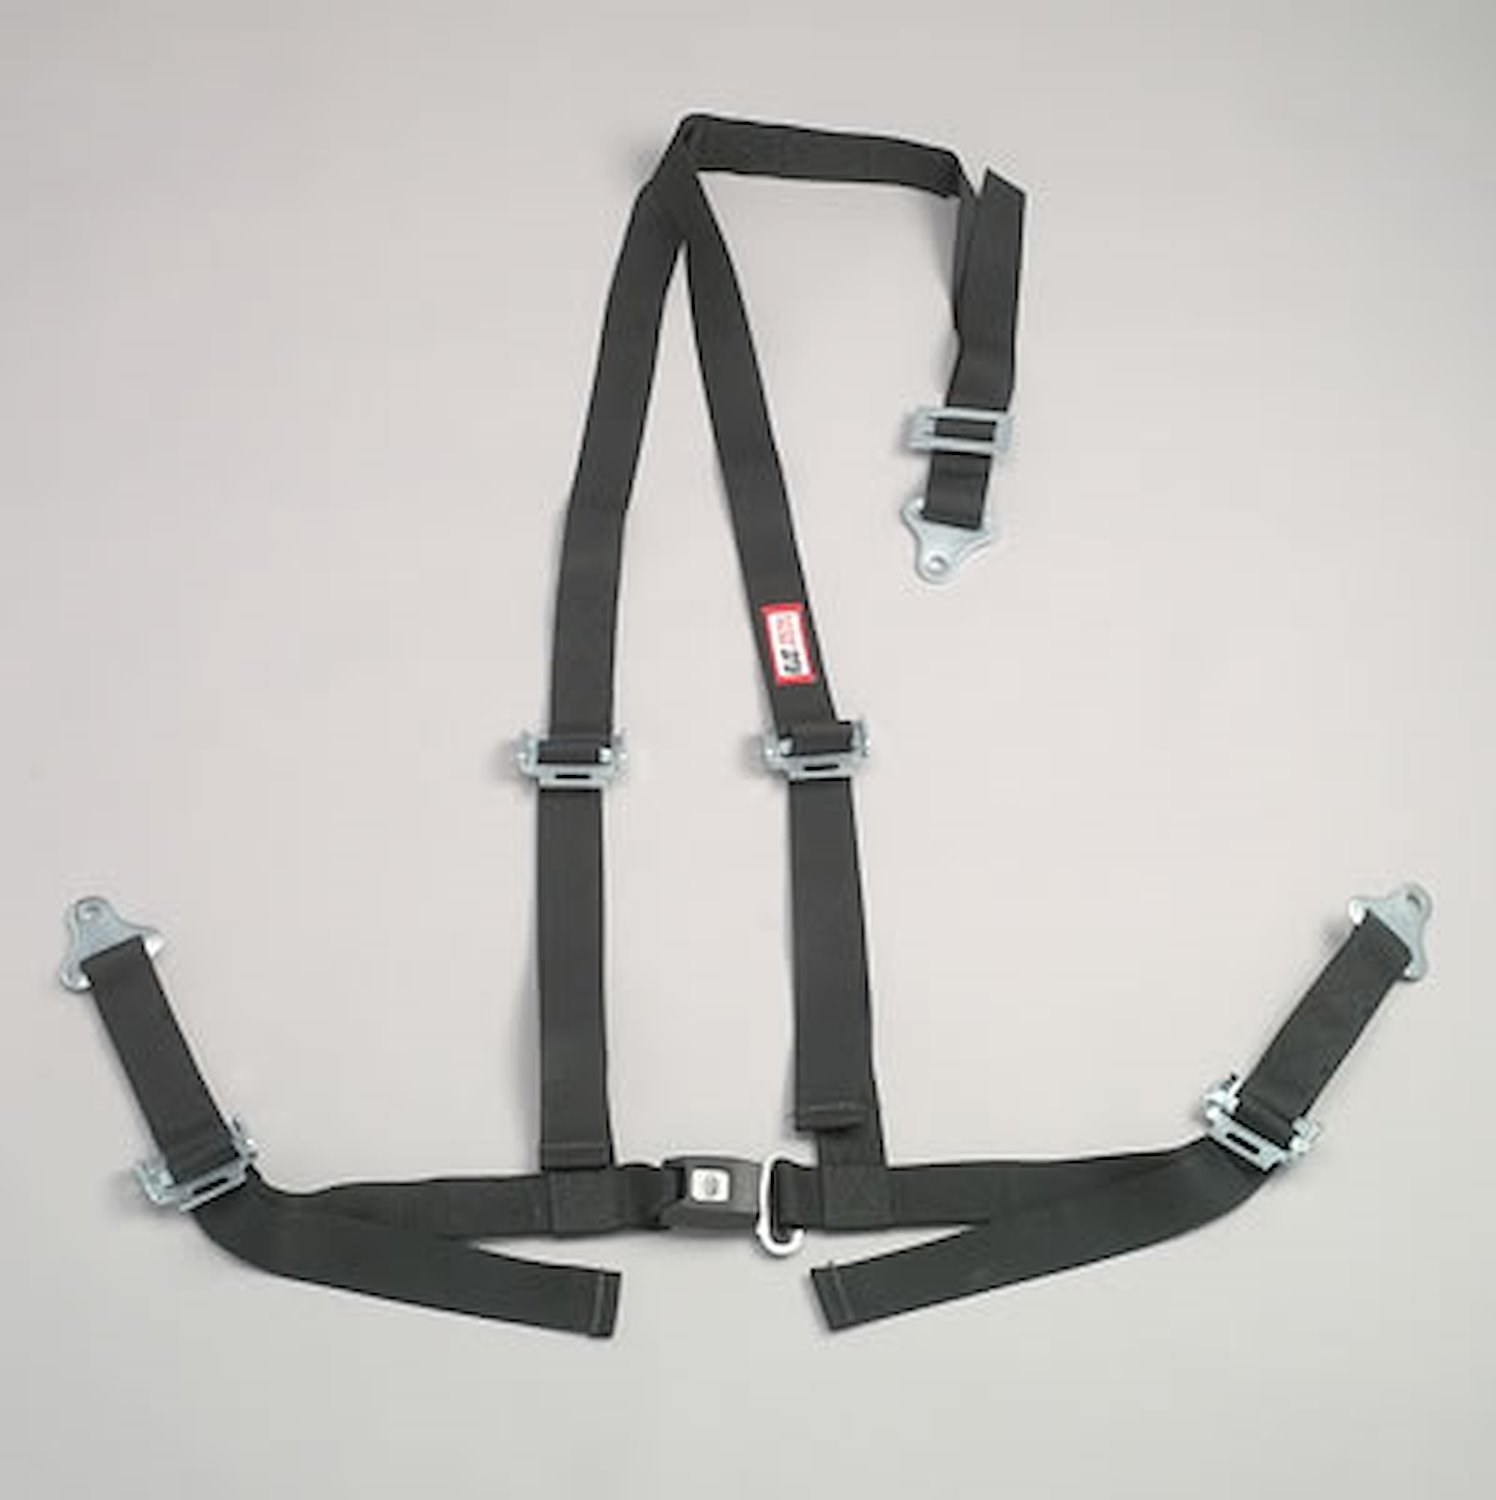 NON-SFI B&T HARNESS 2 PULL UP Lap Belt 2 S. H. V ROLL BAR Mount ALL WRAP ENDS w/STERNUM STRAP KHAKI